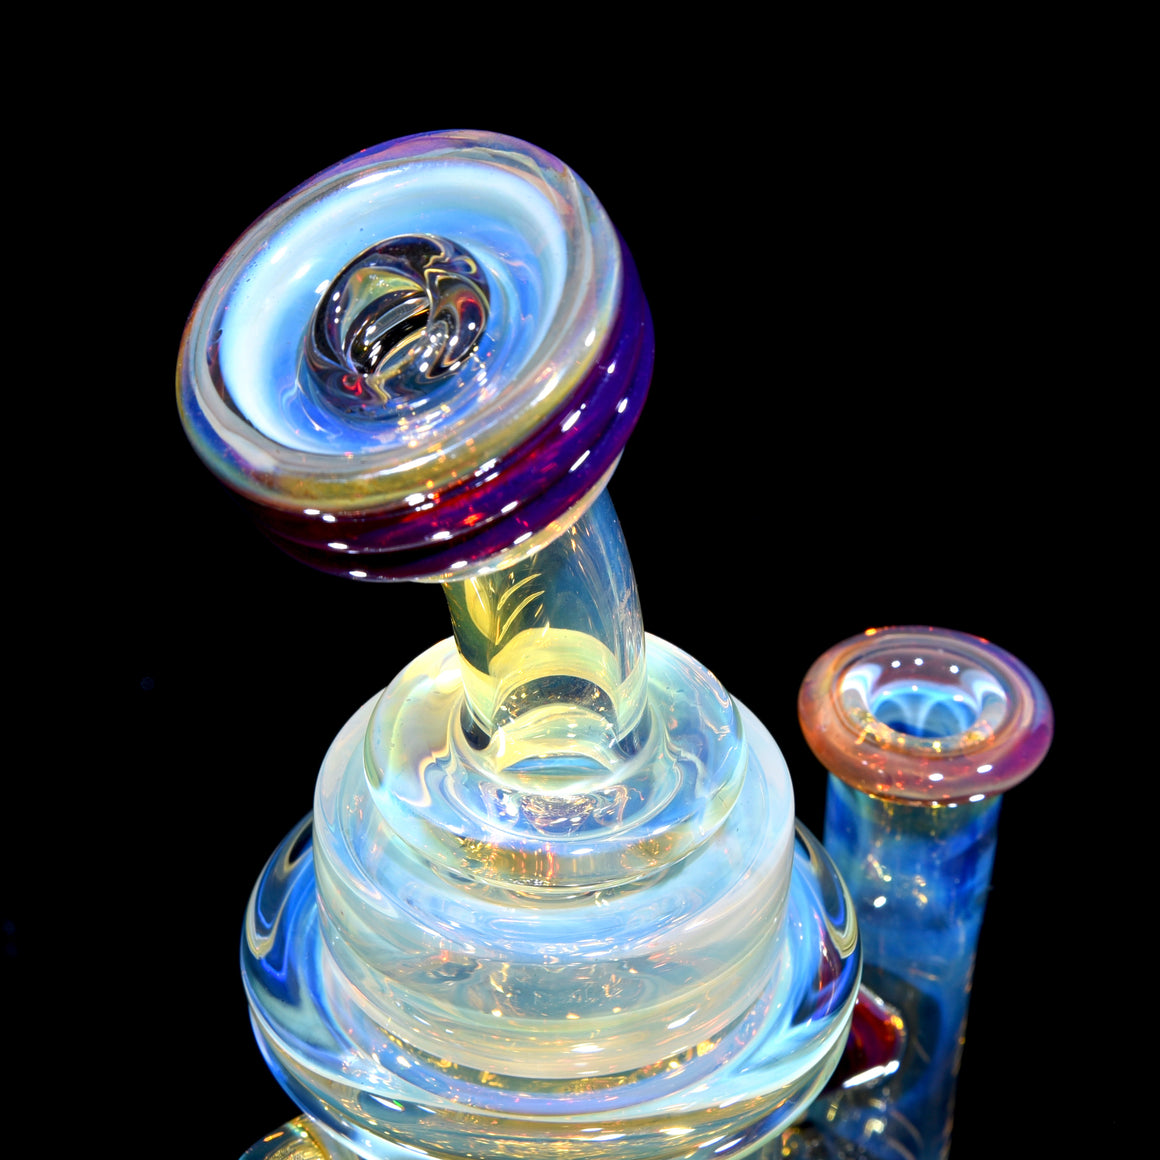 Fumed & Carved Mini Klein Recycler - Mai Tai - 10mm Female